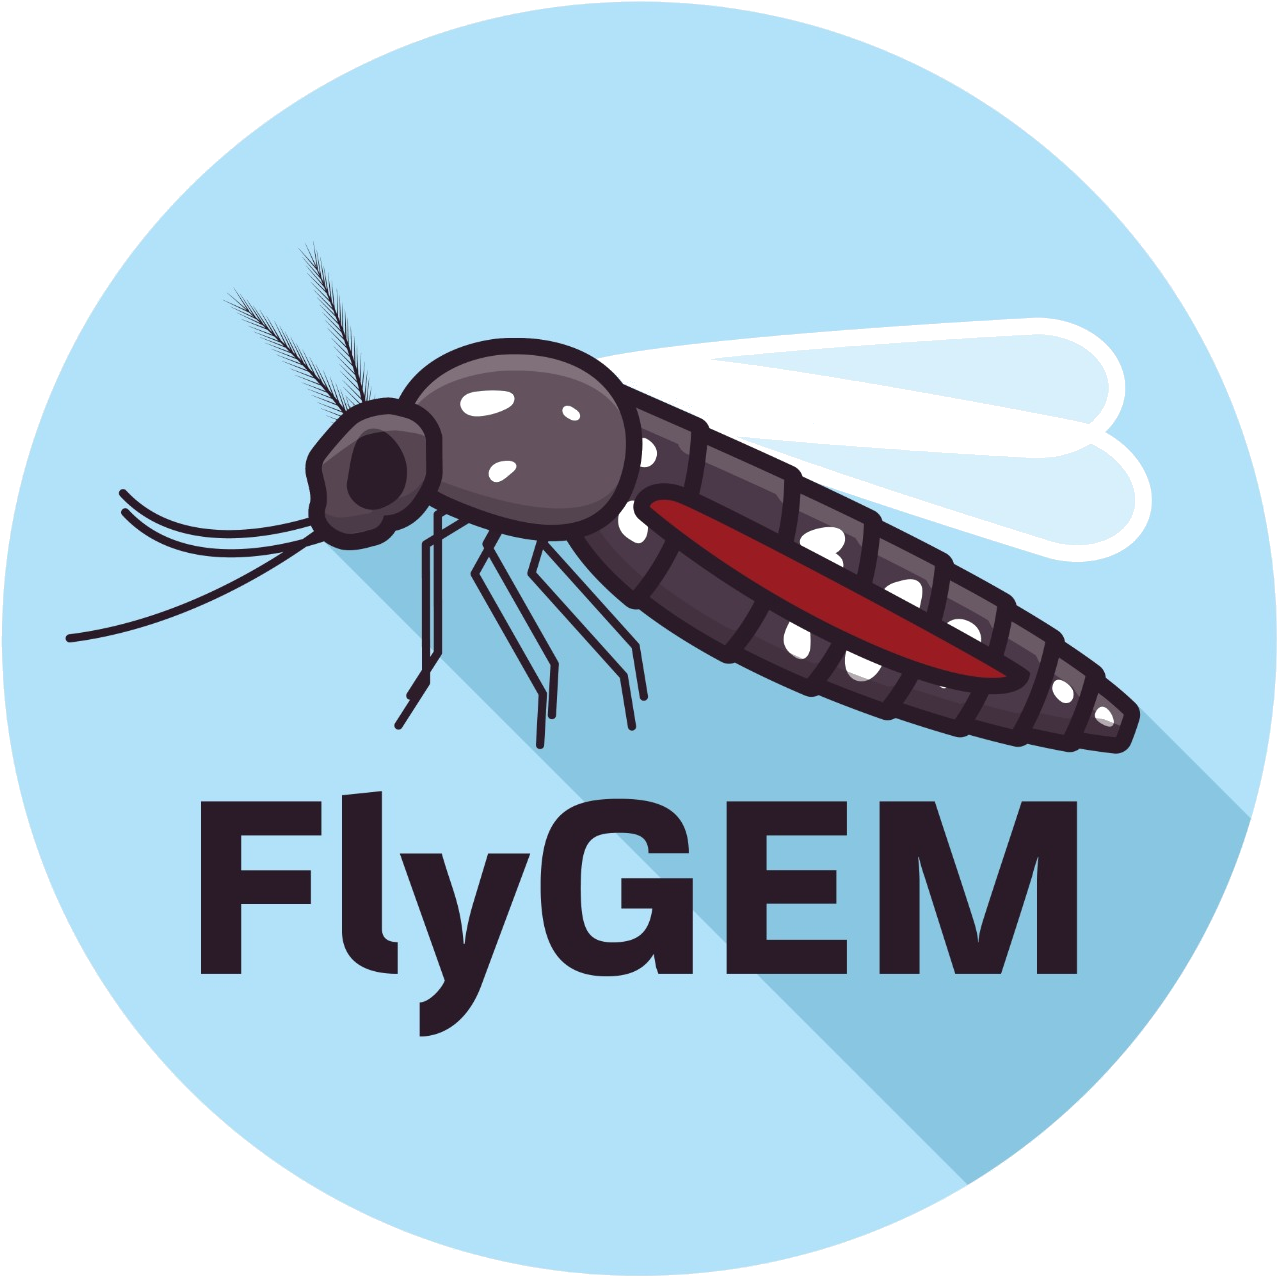 Mosquito Vector Graphic Fly G E M PNG image